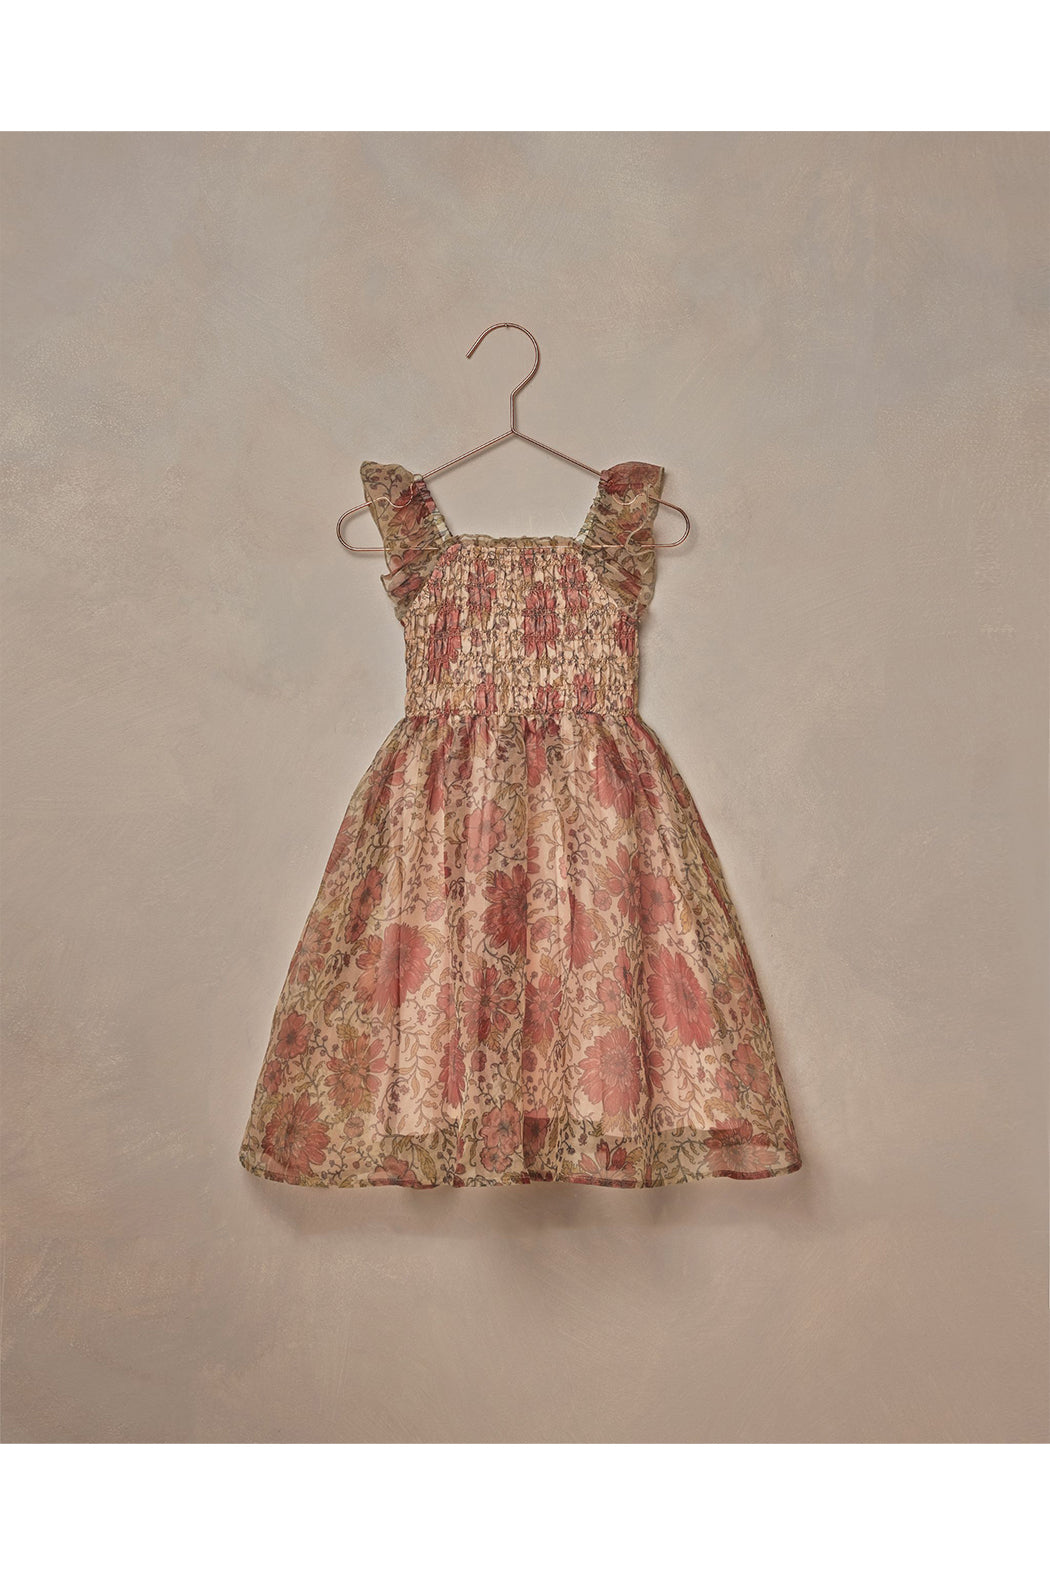 Noralee Dolly Dress - Bloom